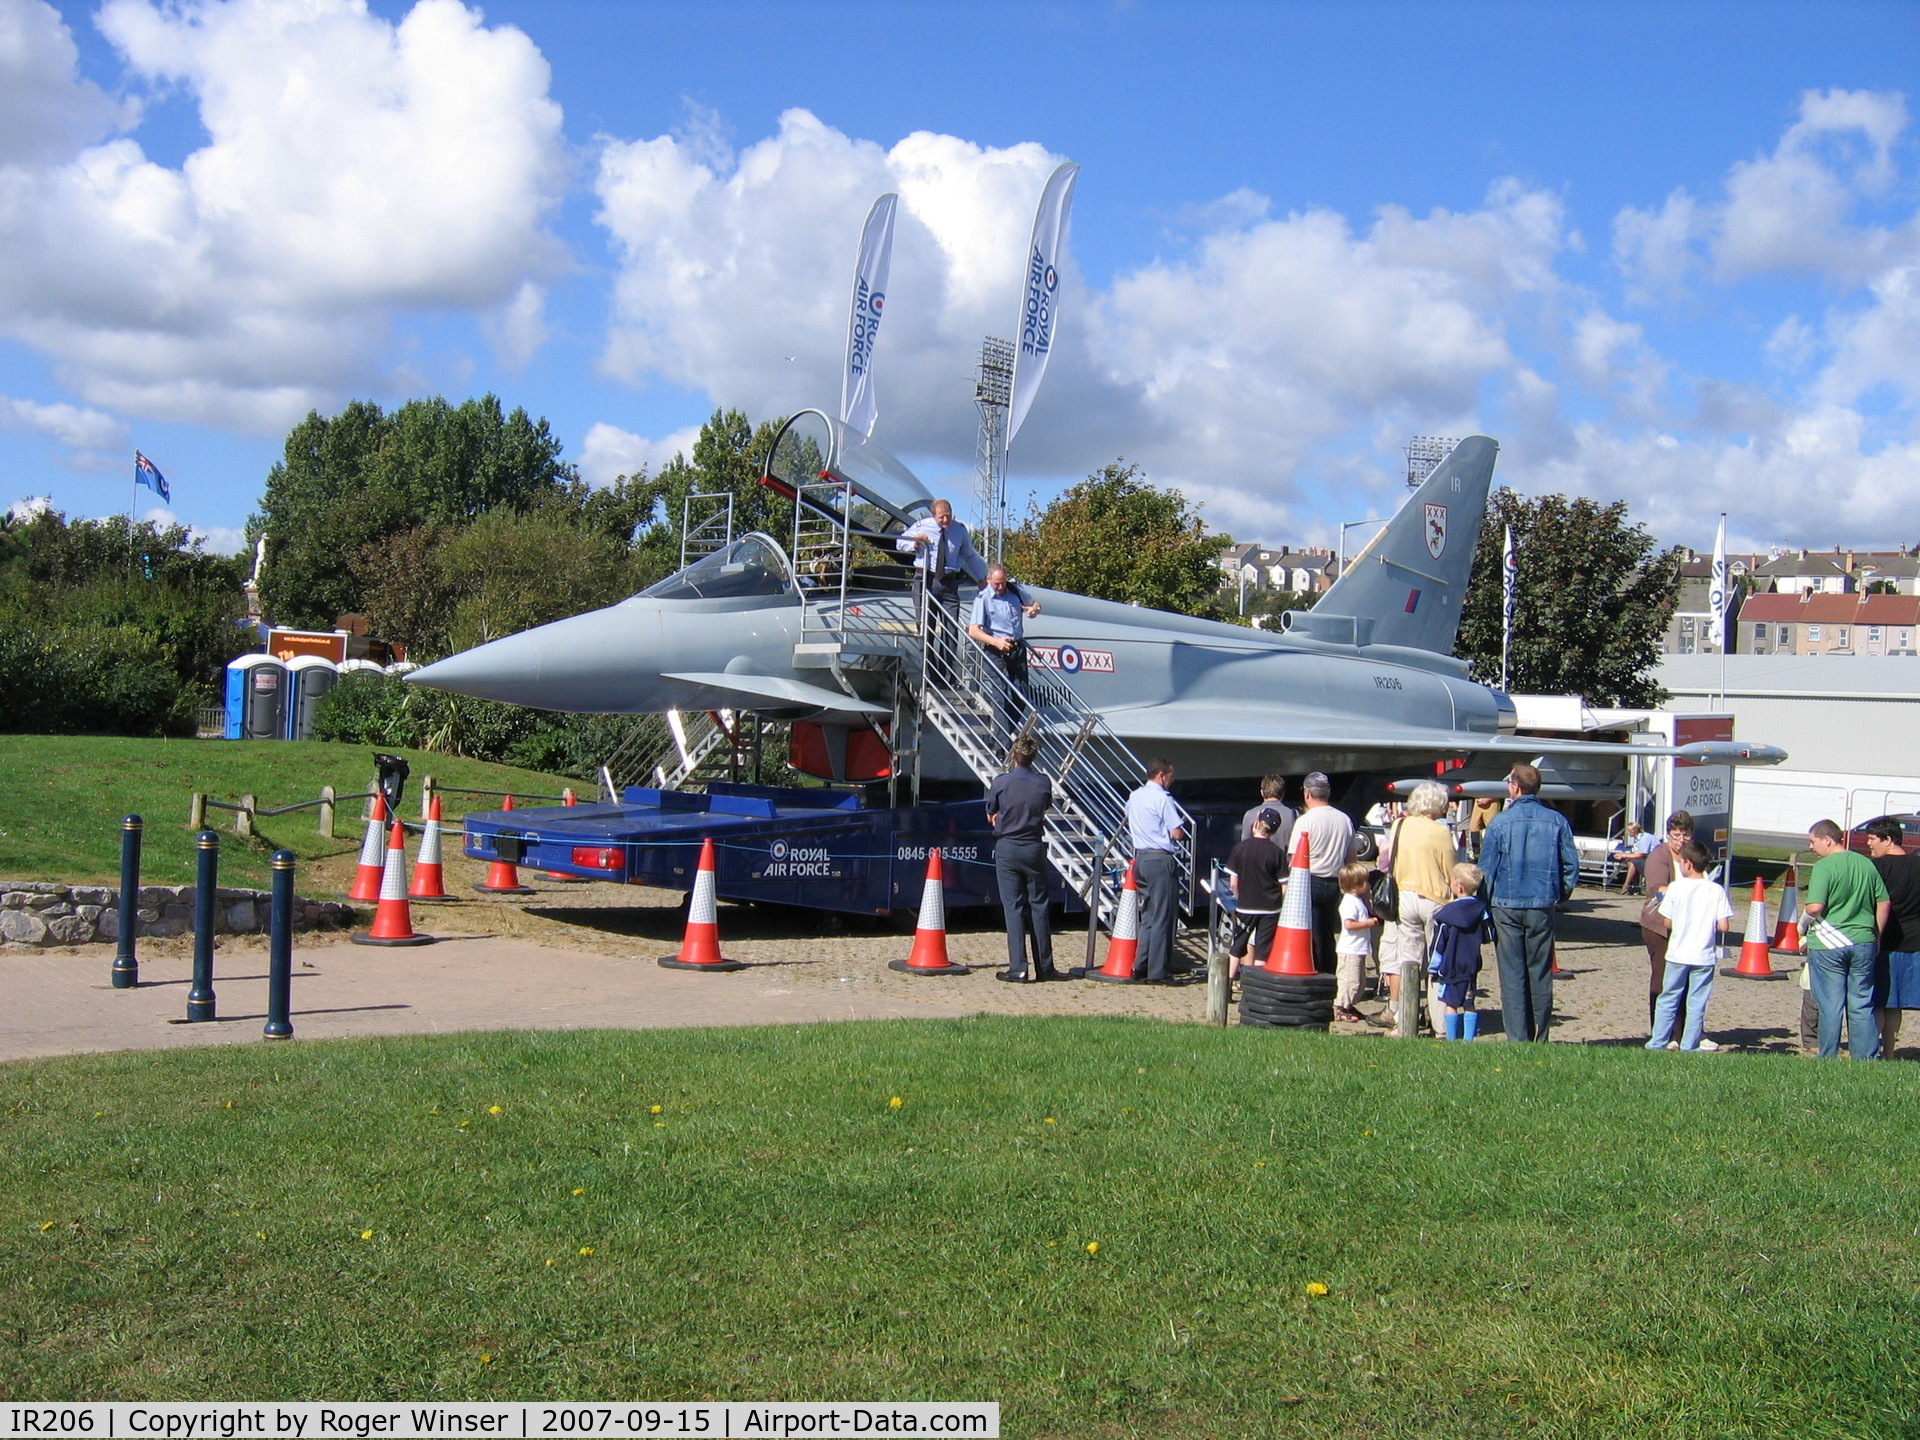 IR206, Eurofighter EF-2000 Typhoon F2 (mock-up) C/N Not found IR206, Off airport. On display at The Welsh Festival of the Air, Swansea Bay, Wales, UK. Typhoon replica carrying s/n IR206, code IR and 29 Squadron RAF markings. 